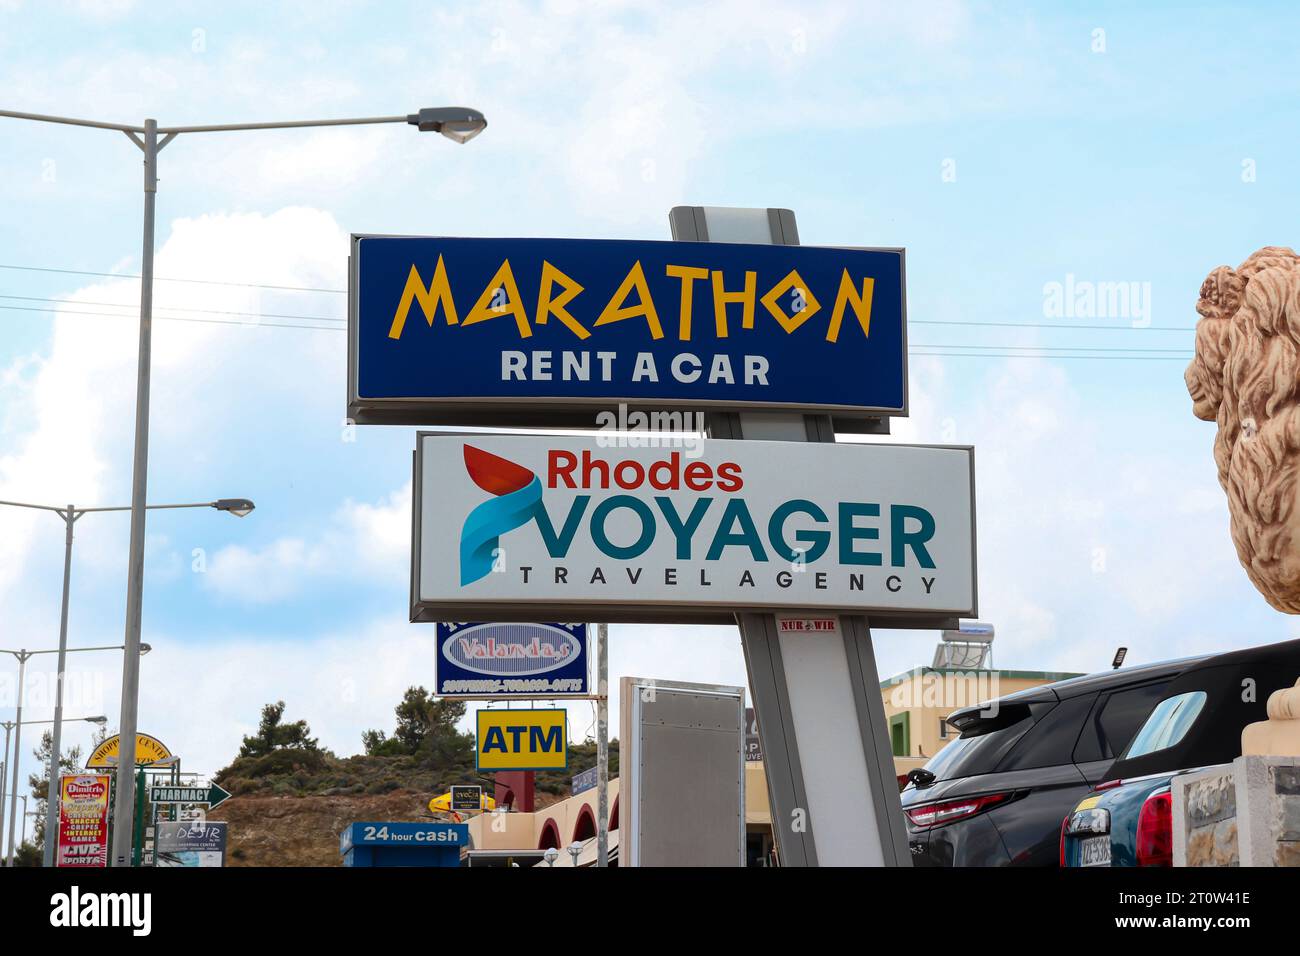 Marathon Rent a Car business and Rhodes Voyager travel agency office sign informing tourist people of store location Stock Photo